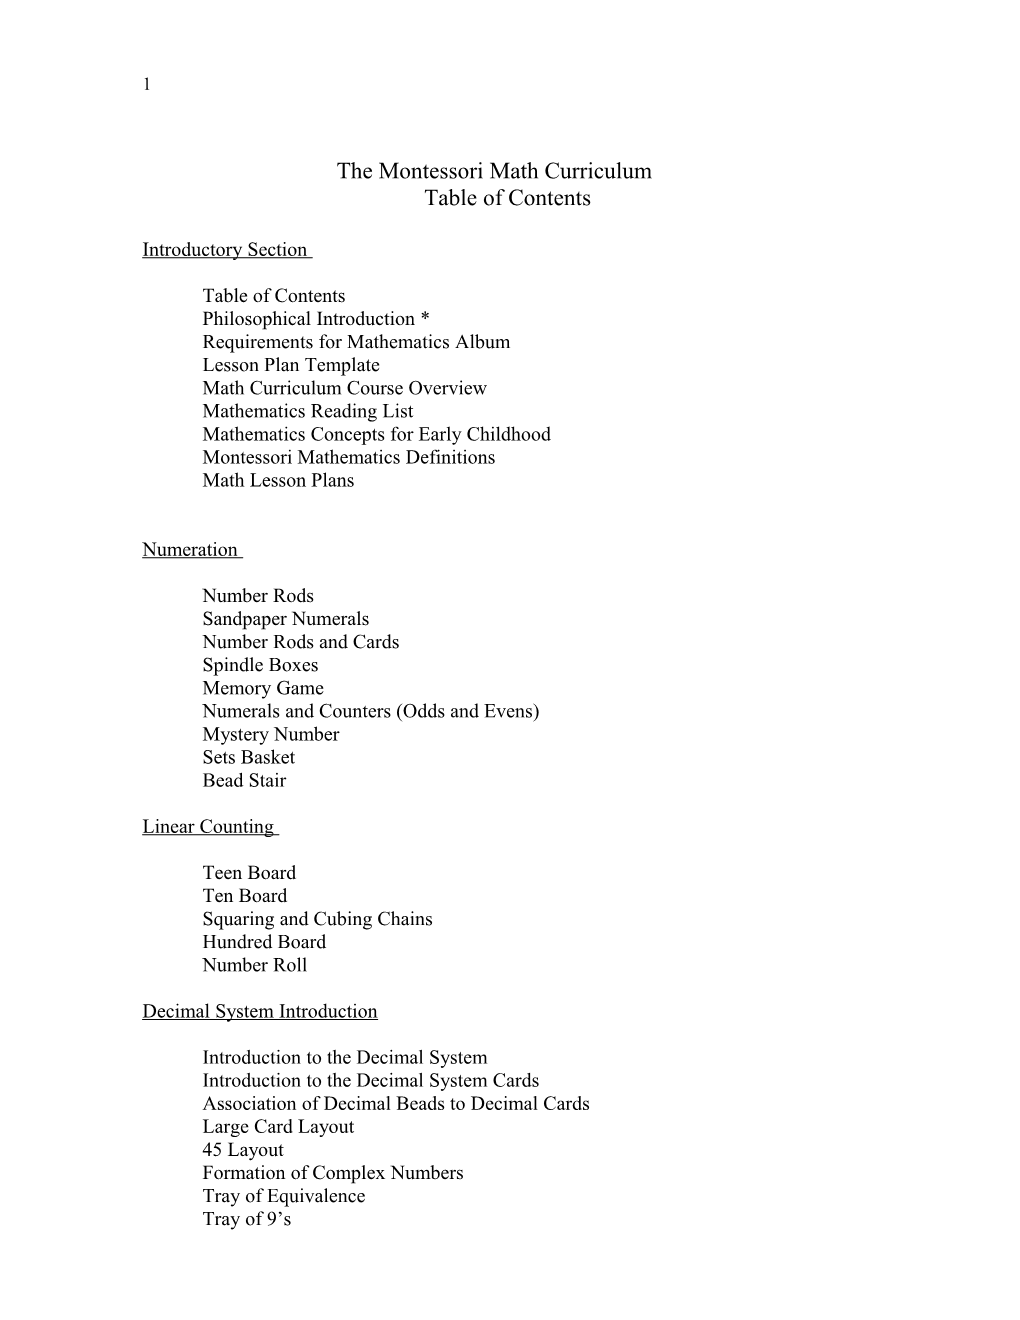 The Montessori Math Curriculum Table of Contents